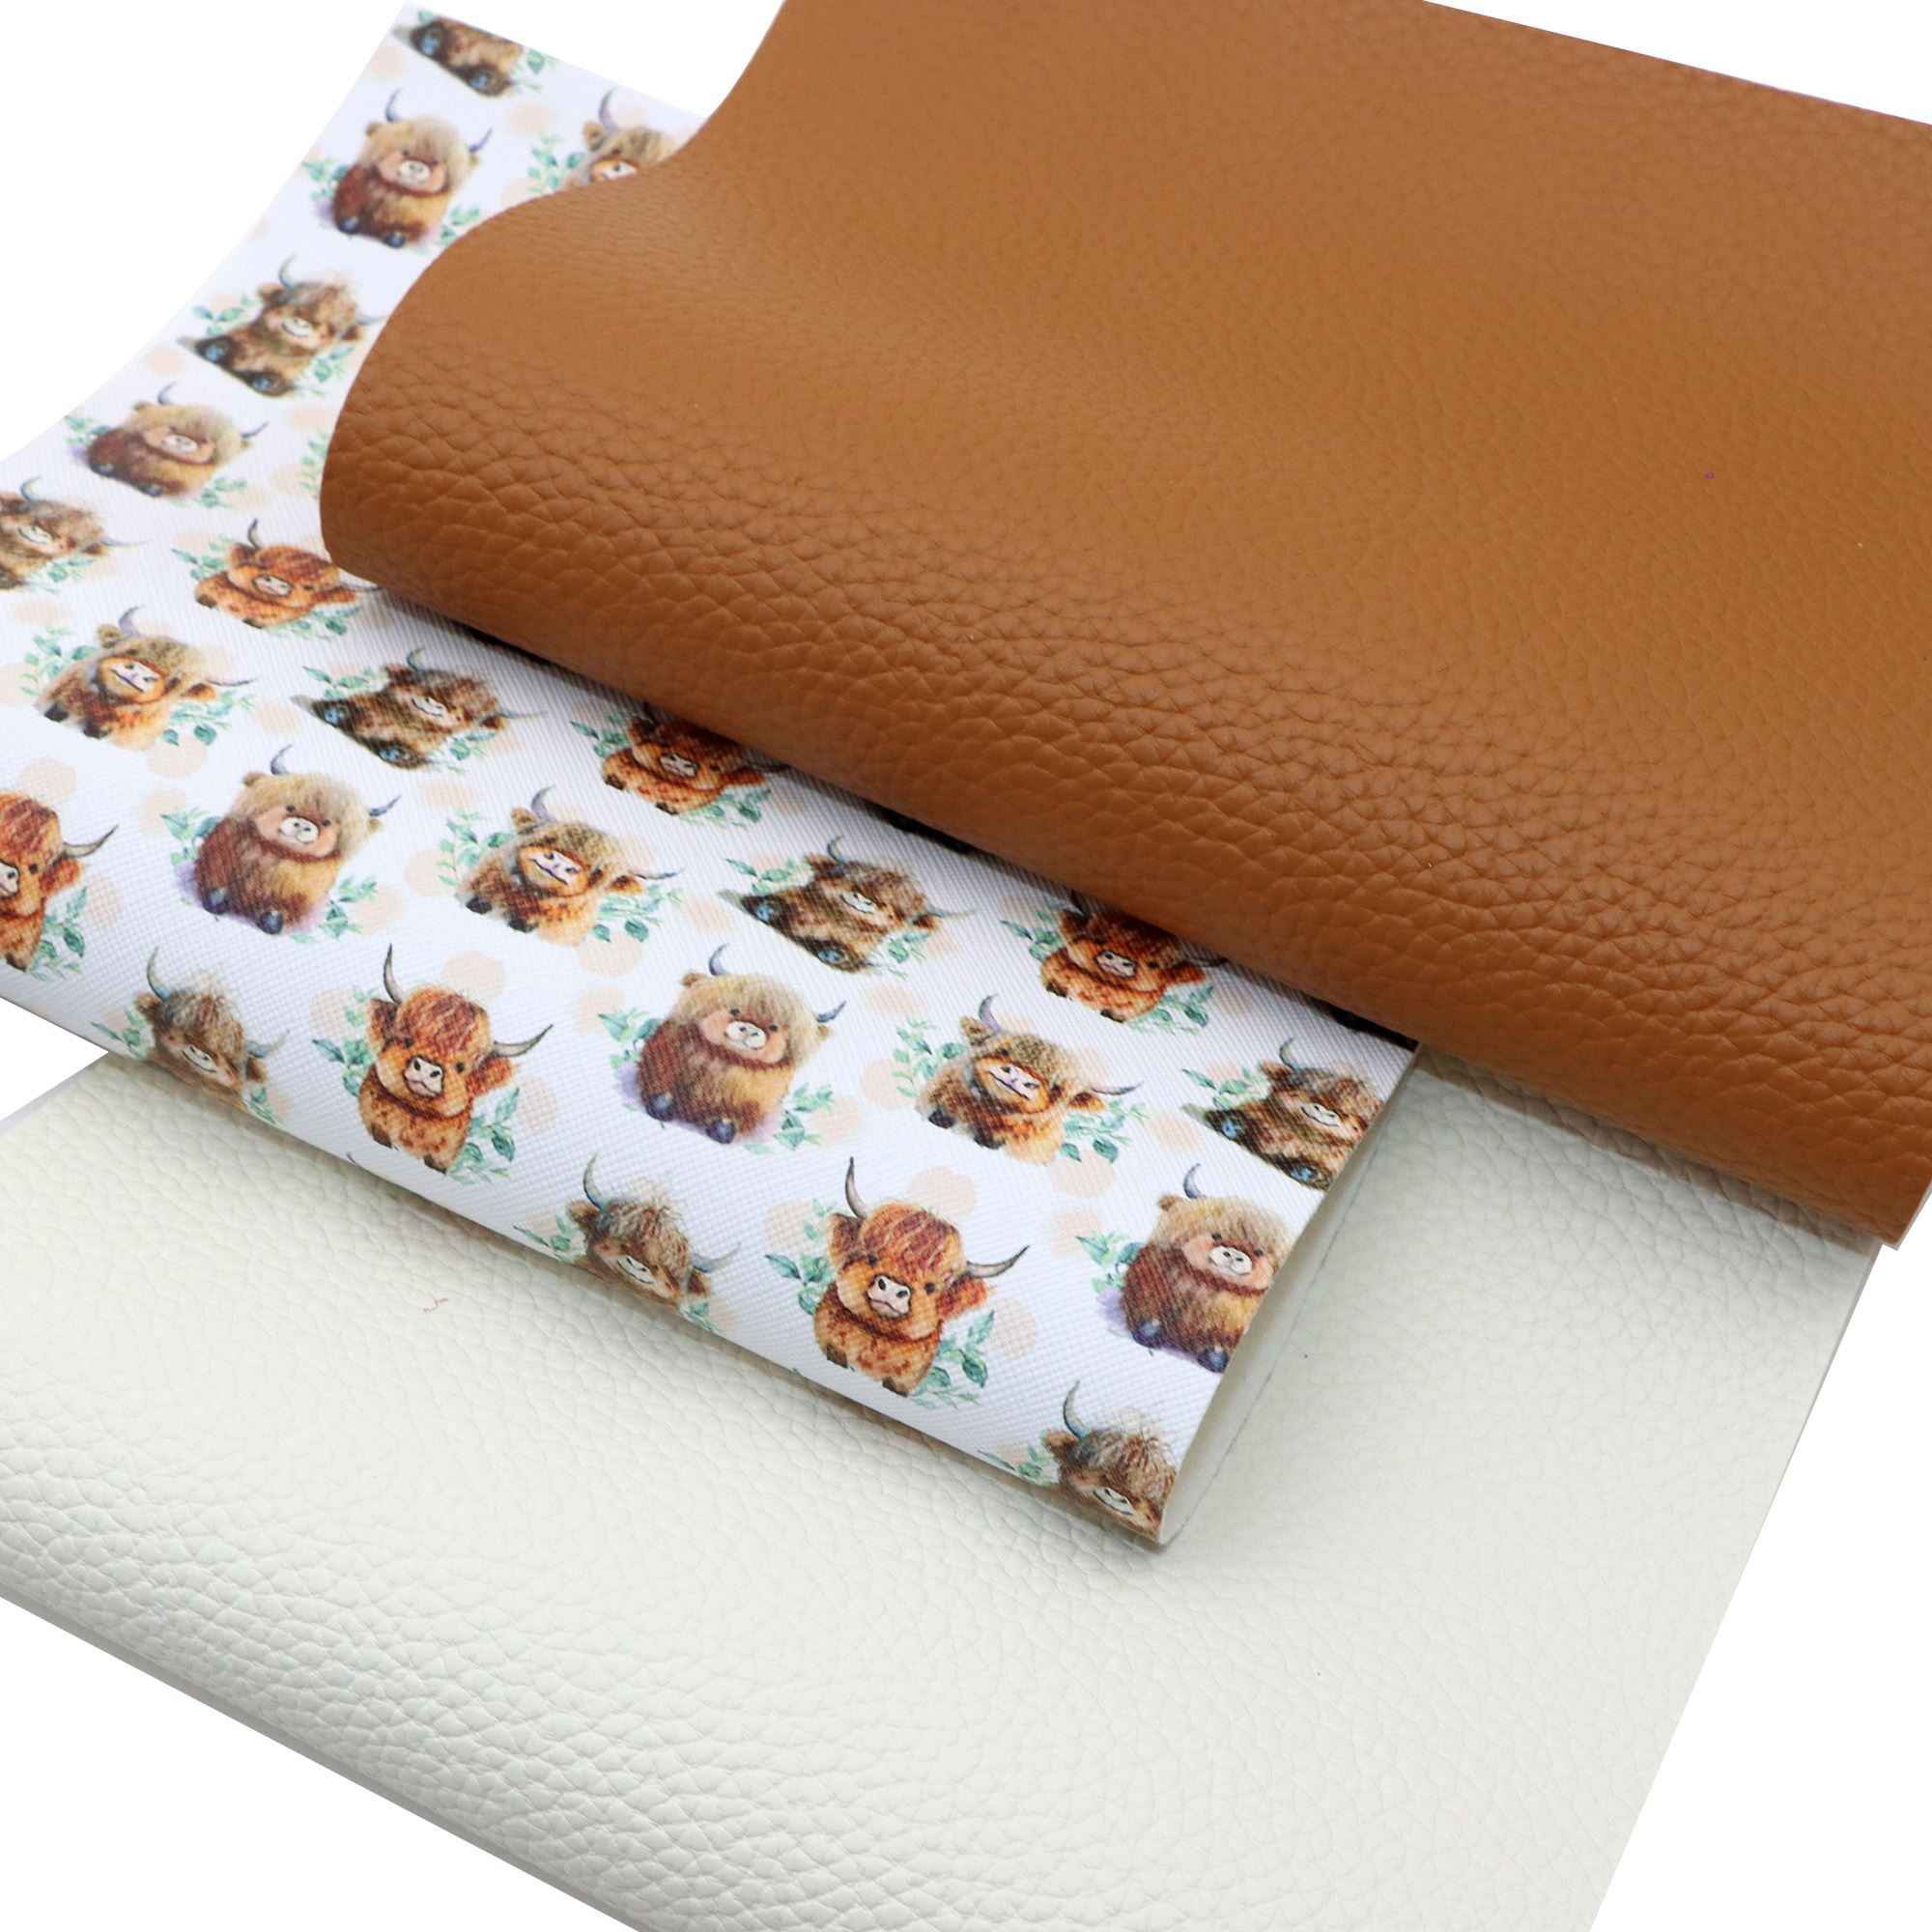 

3pcs/set Animals Cows Printed Faux Leather Sheets, 7.87x12.99in/20*33cm, Solid Color Synthetic Leather Fabric Set, For Diy Handmade Crafts Earrings Hair Bows Projects Supply